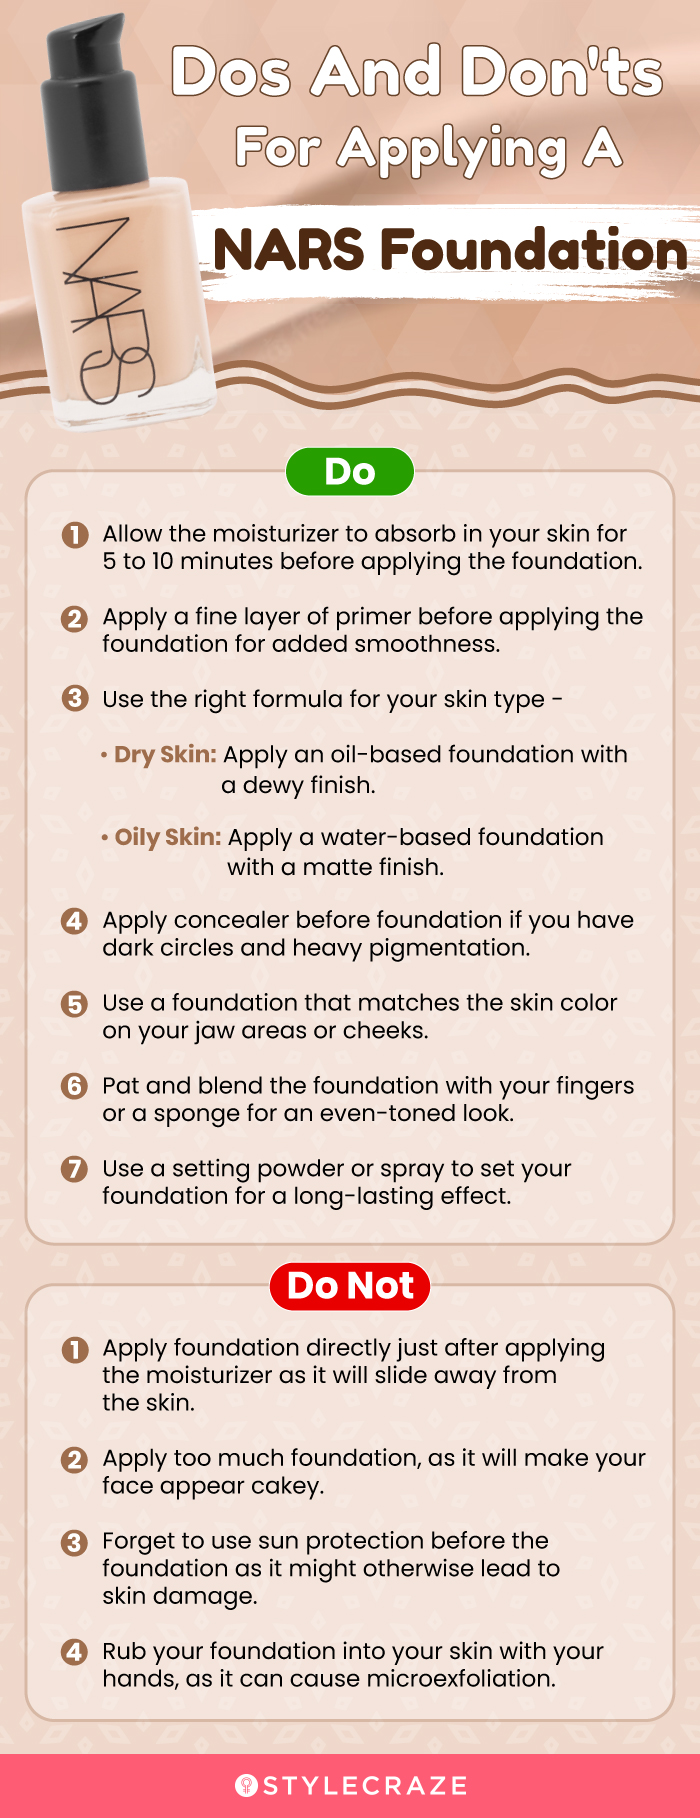 Dos And Don'ts For Applying A NARS Foundation (infographic)